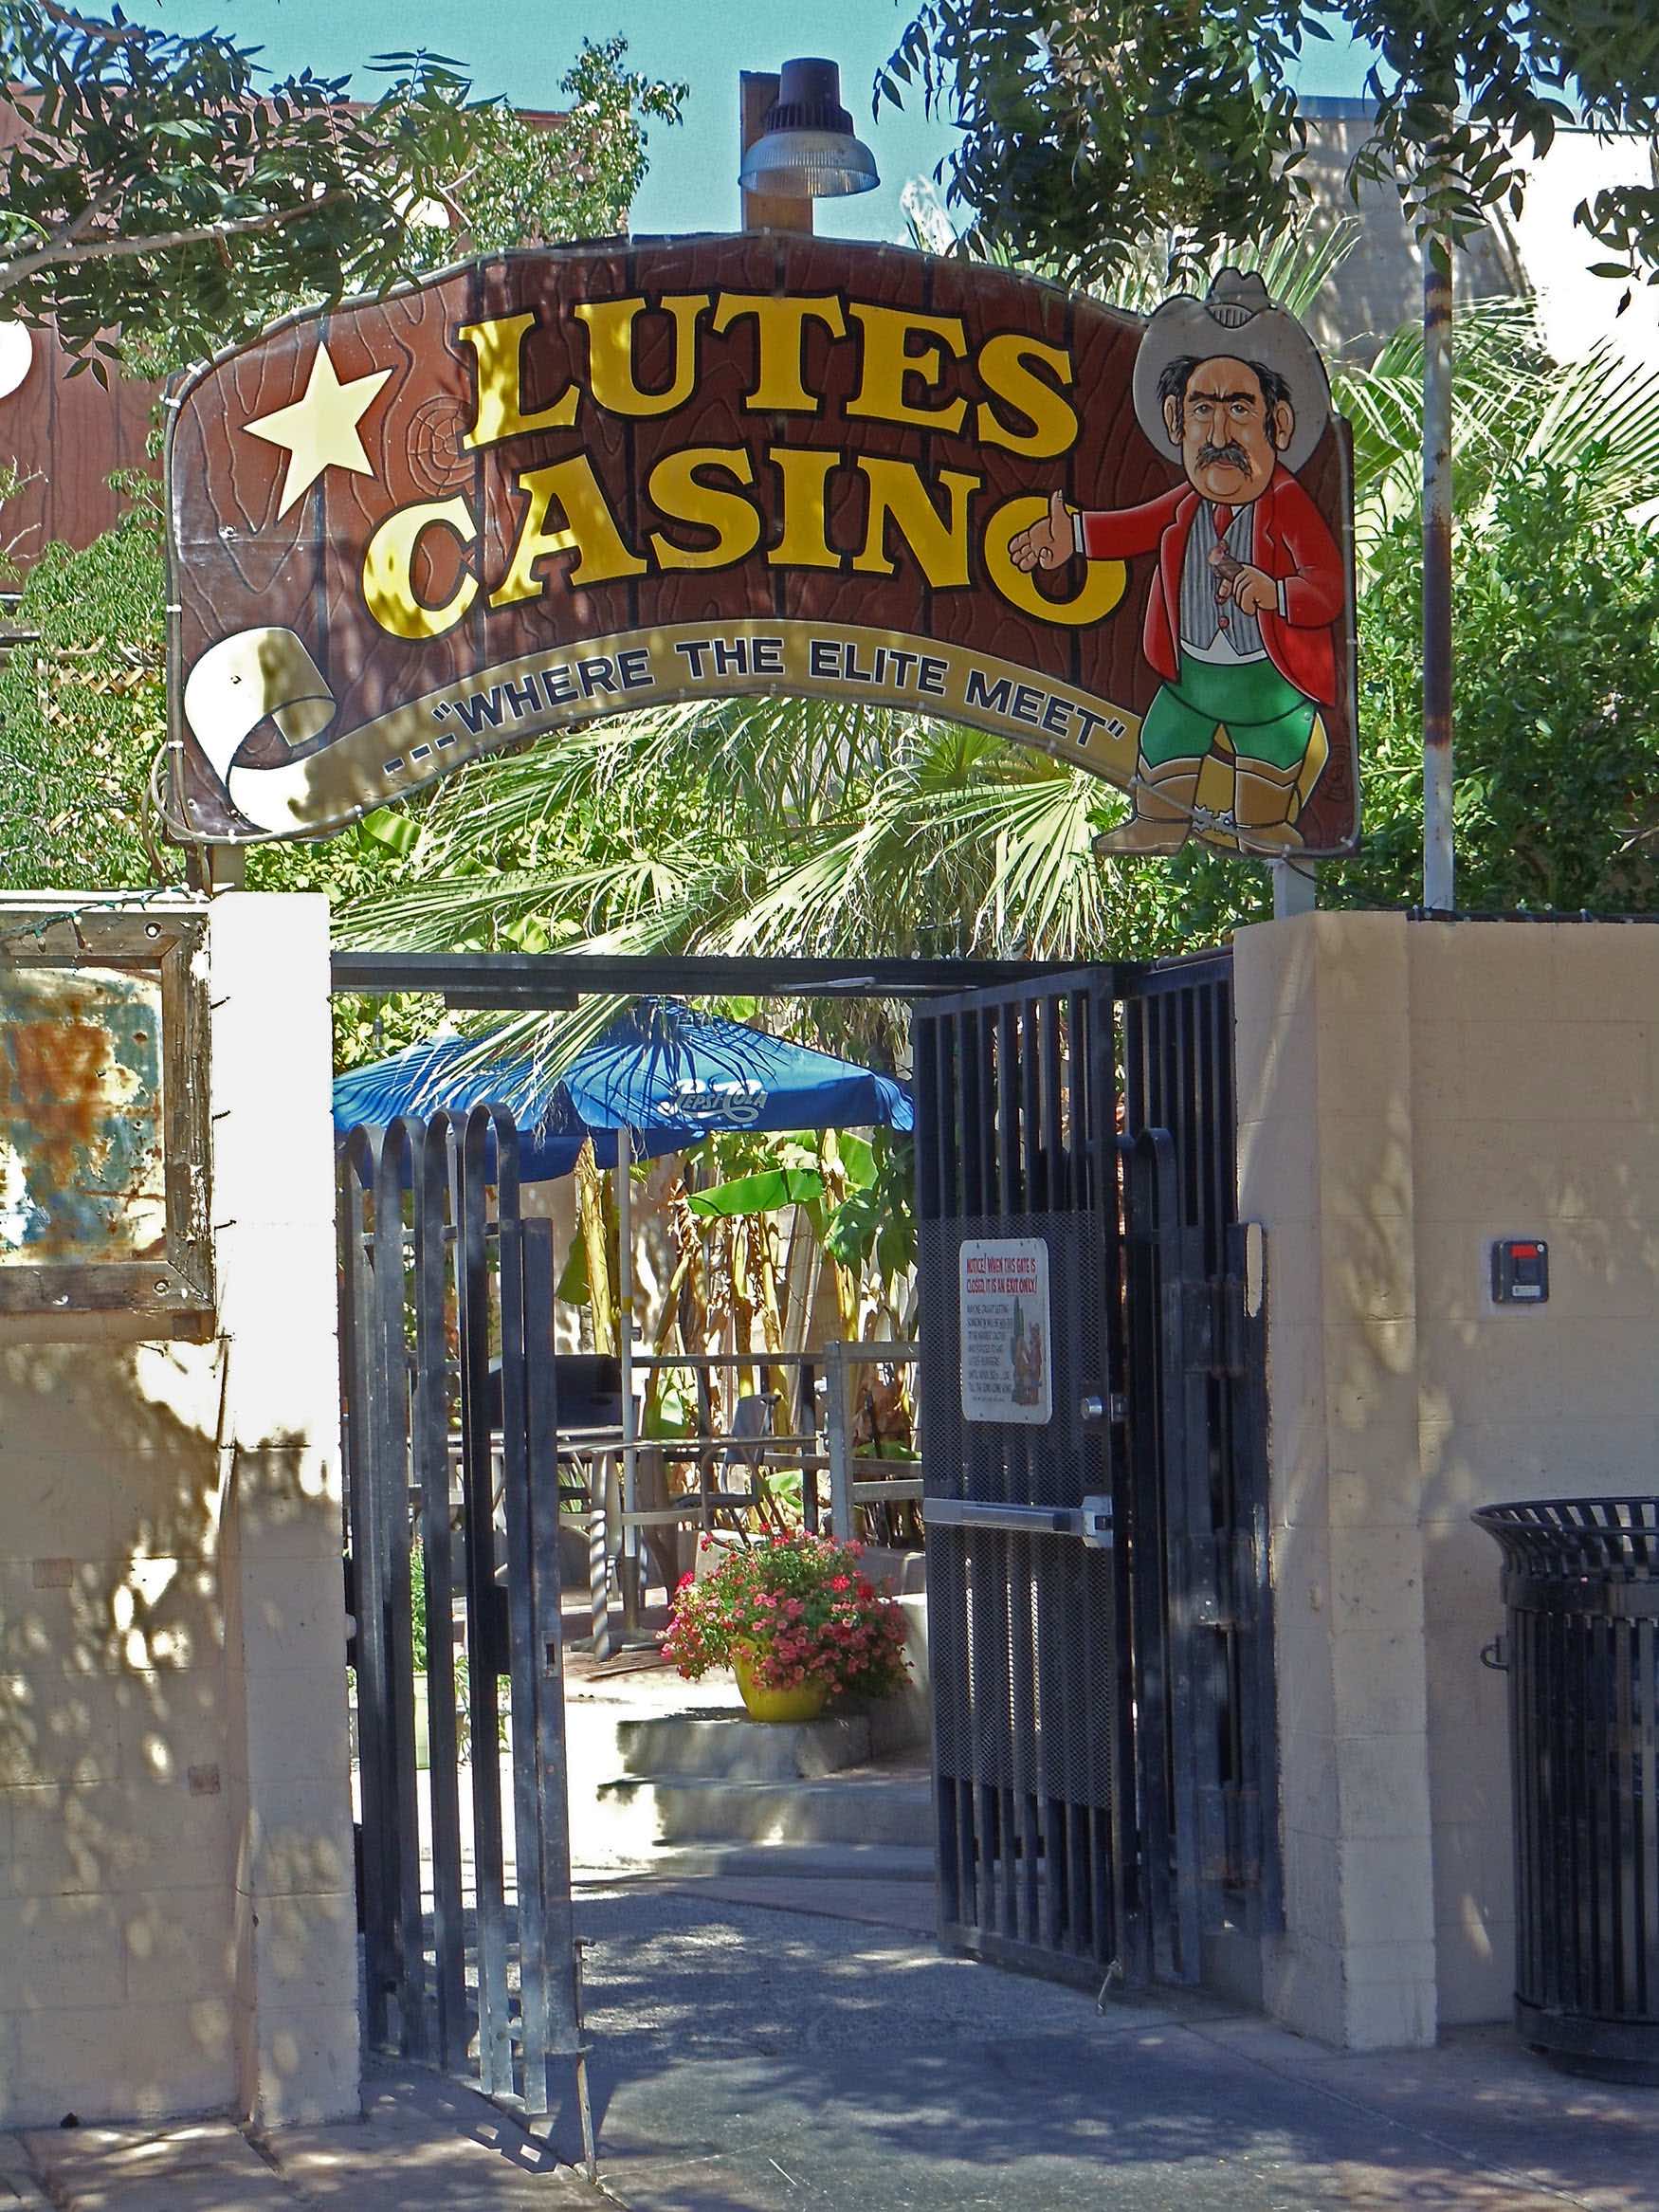 An entrance outside is seen to Lutes Casino